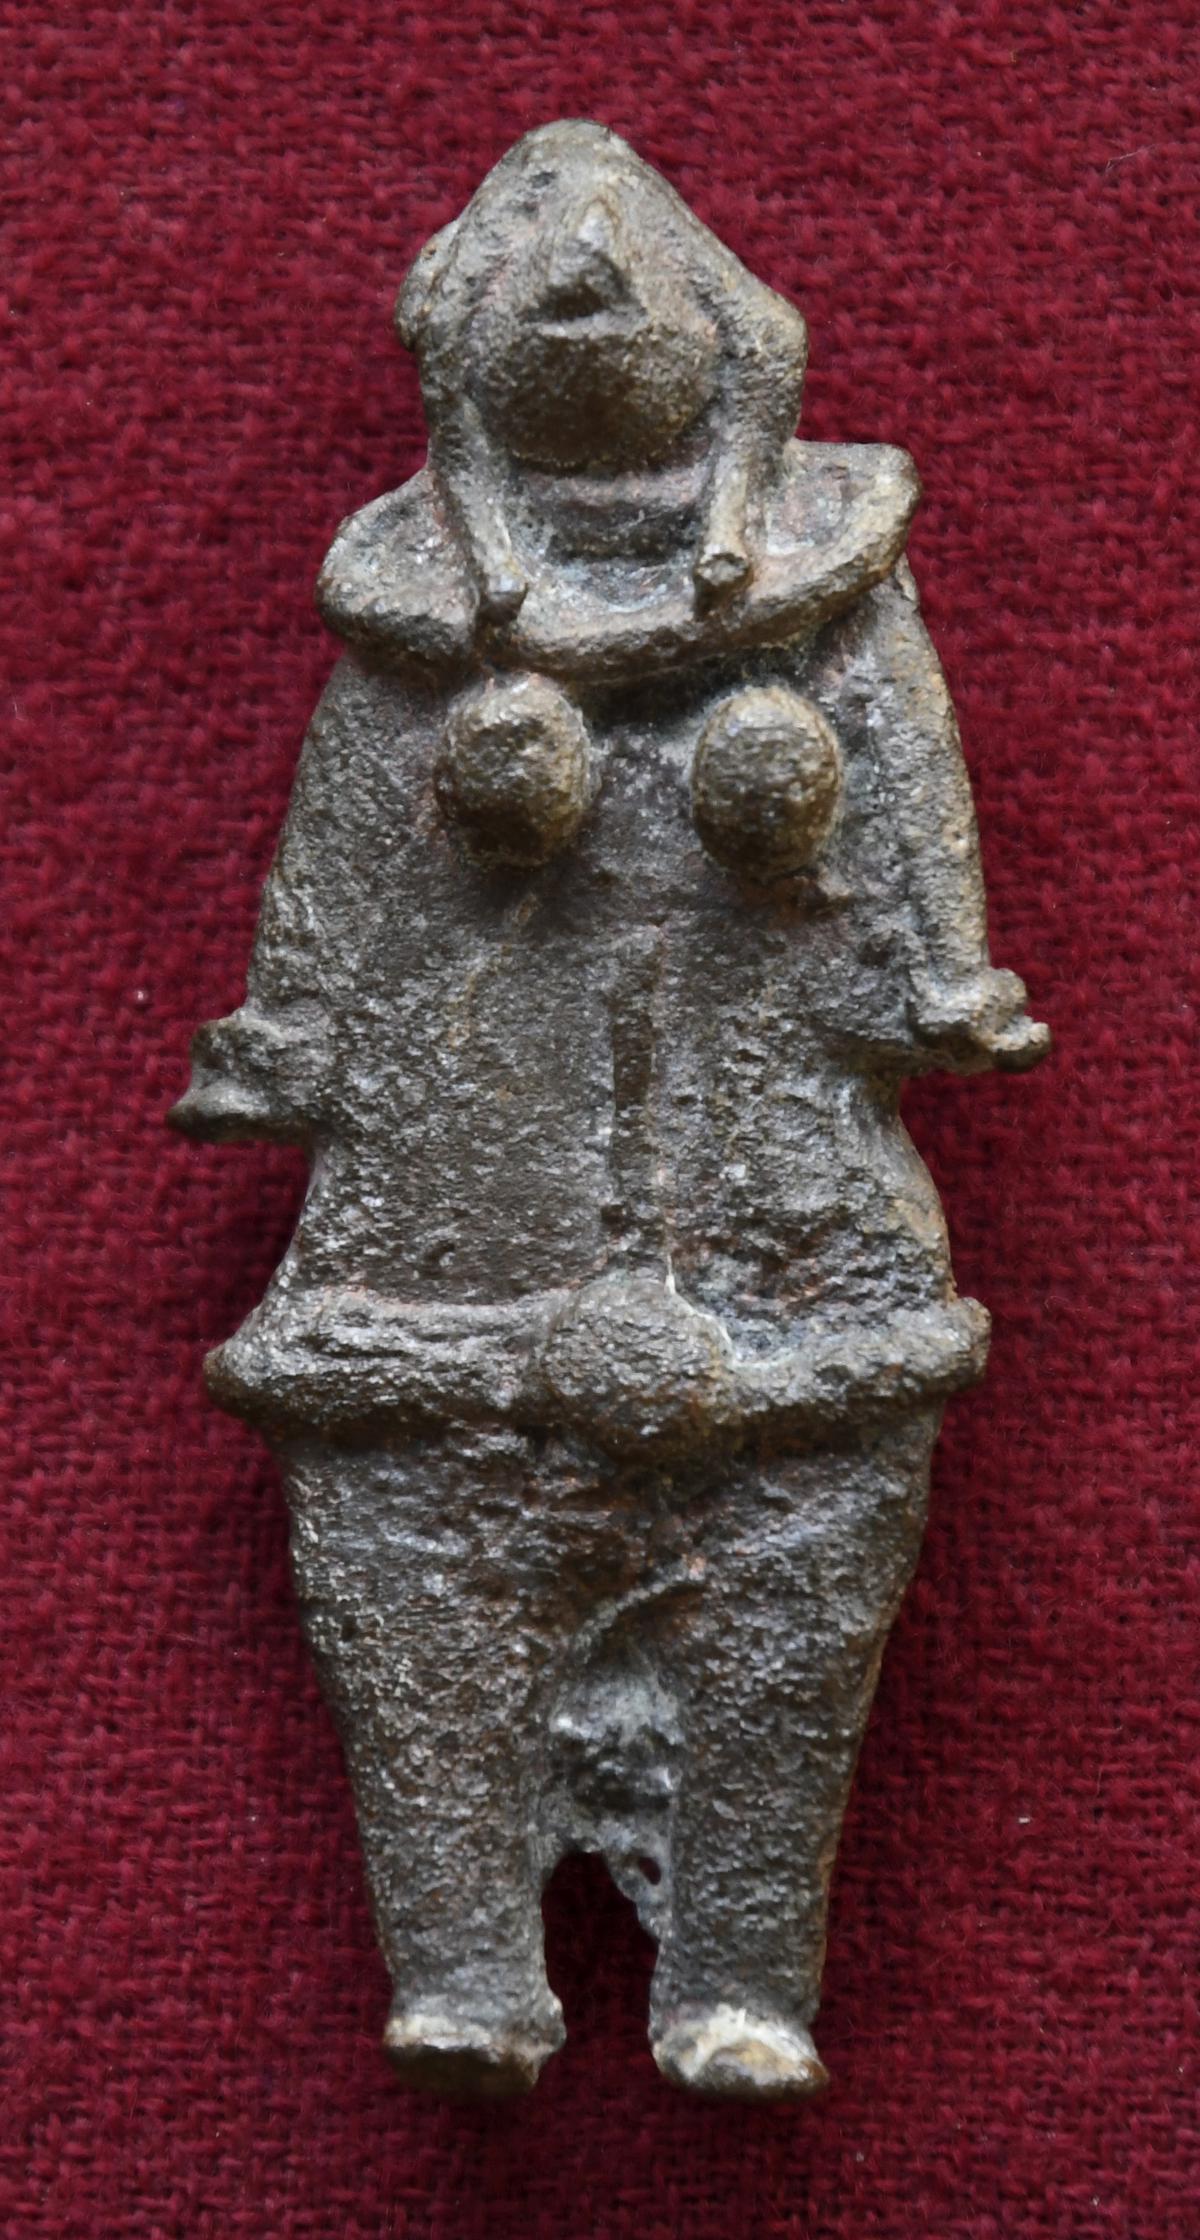 A figurine of Mother Goddess unearthed over a hundred years ago at the Adichanallur site and kept at the Egmore museum in Chennai. Photo: Special Arrangement